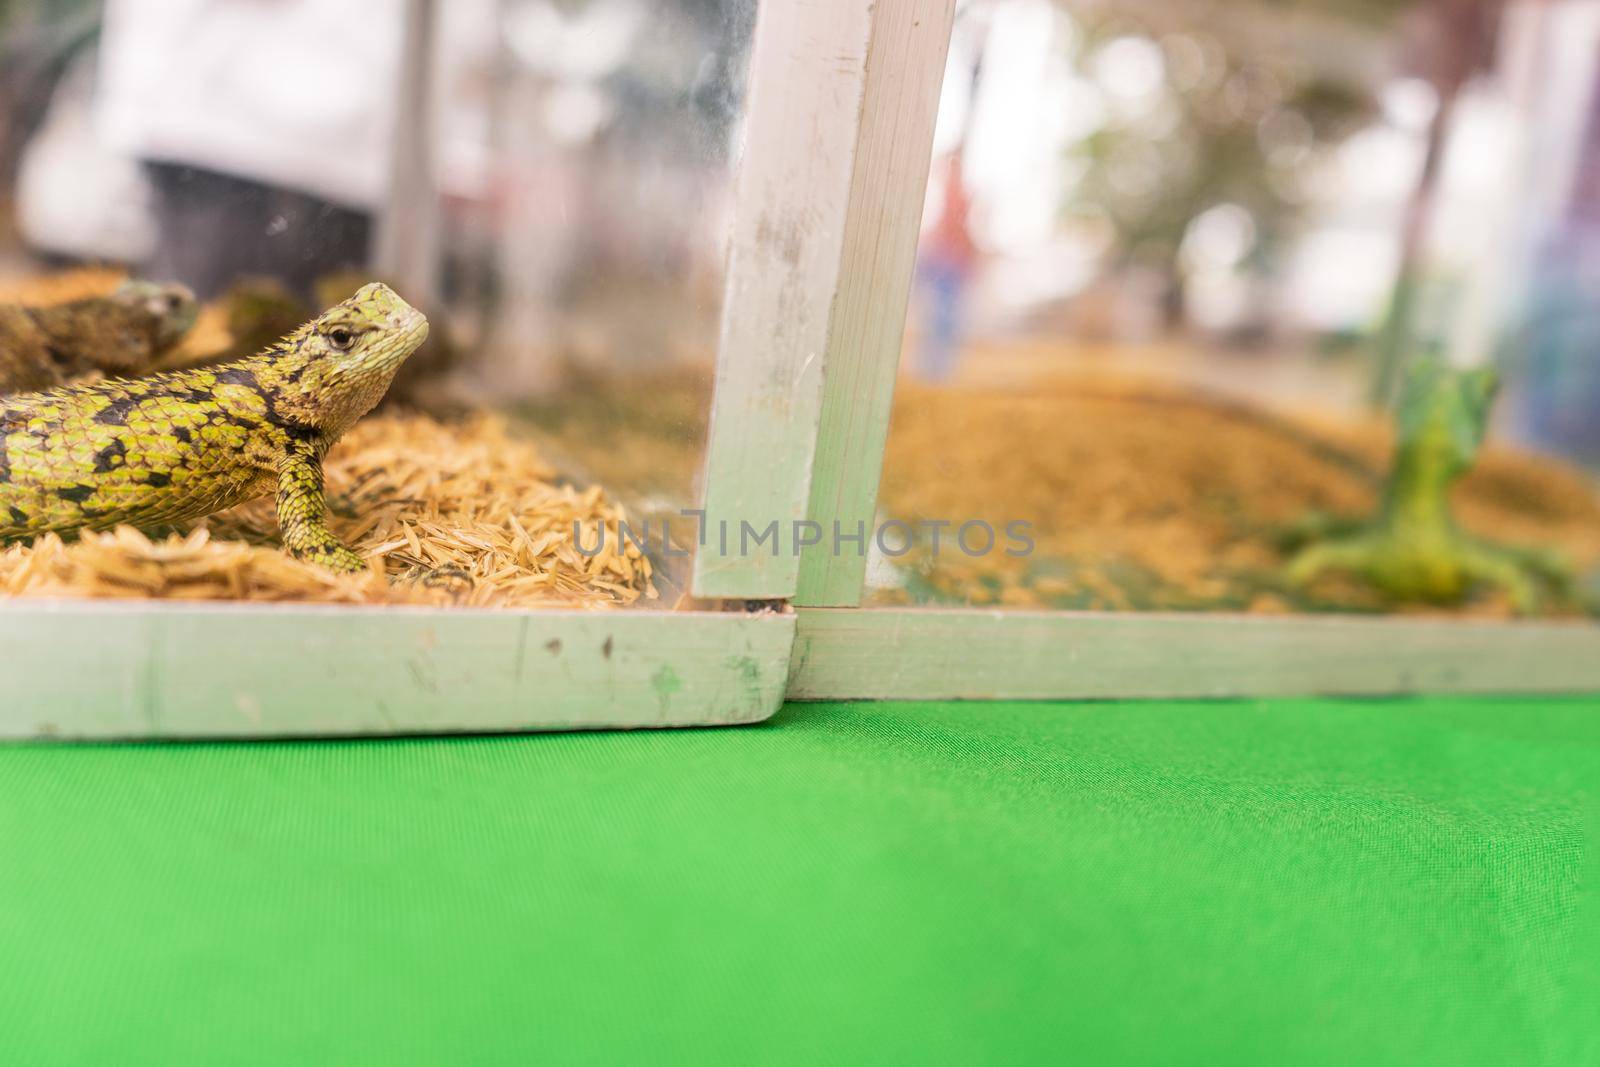 Pet spiny lizard in a glass tank for sale at an exotic animal market by cfalvarez